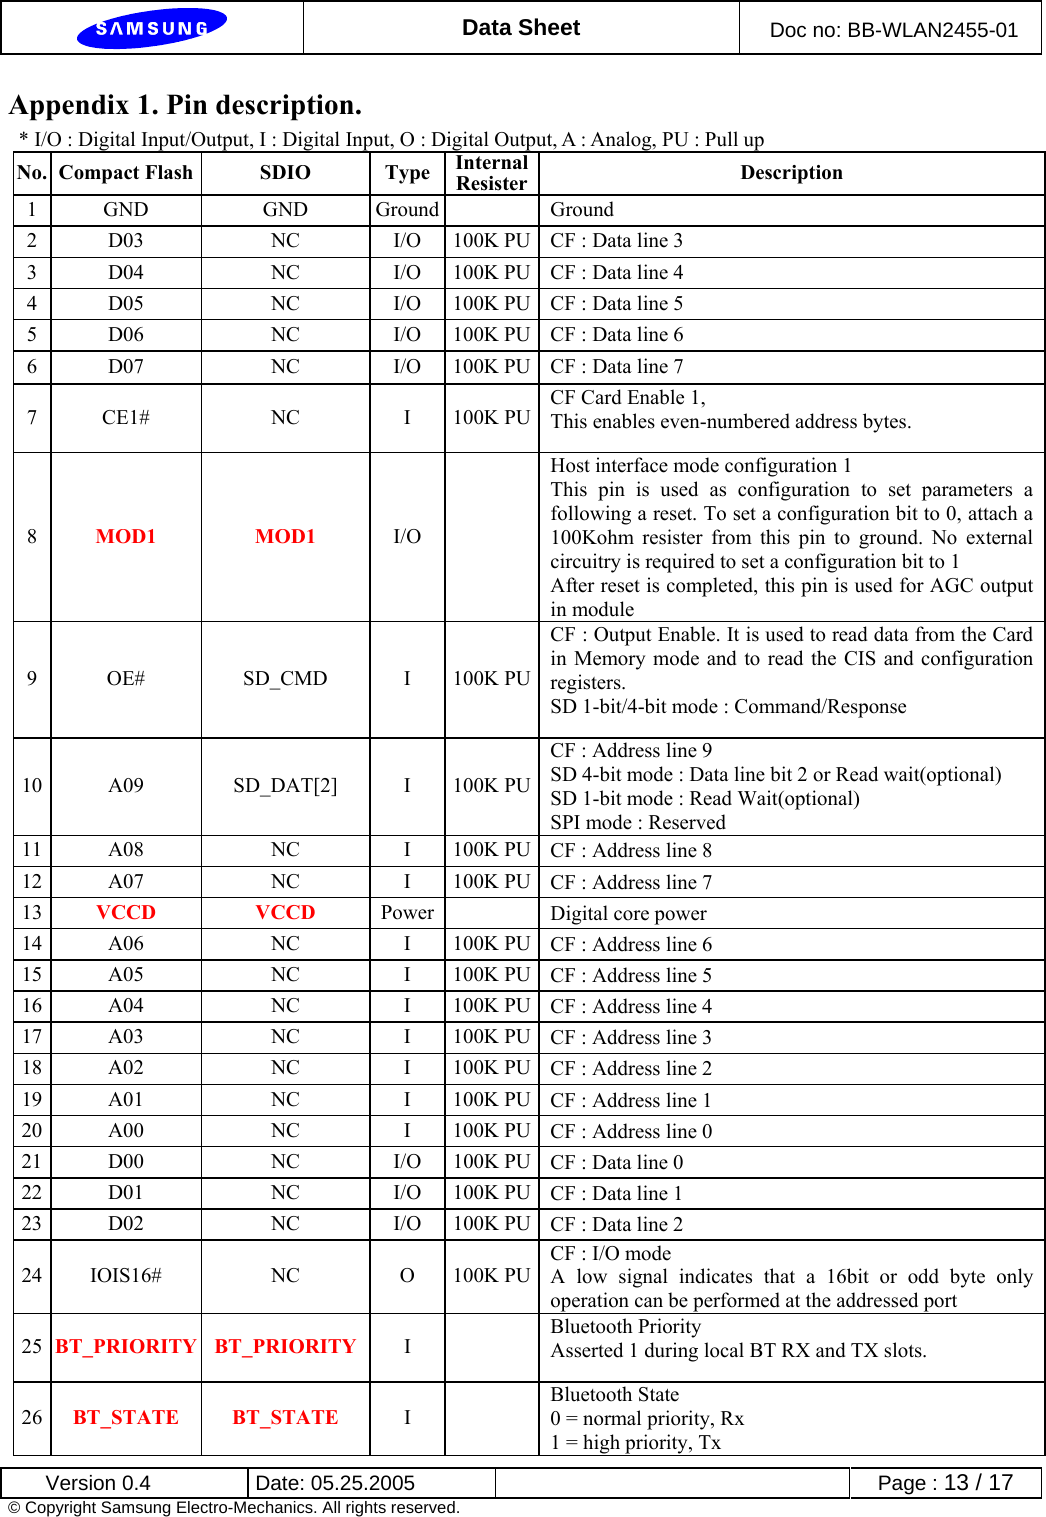  Data Sheet  Doc no: BB-WLAN2455-01  Version 0.4  Date: 05.25.2005      Page : 13 / 17 © Copyright Samsung Electro-Mechanics. All rights reserved. Appendix 1. Pin description.     * I/O : Digital Input/Output, I : Digital Input, O : Digital Output, A : Analog, PU : Pull up No. Compact Flash  SDIO  Type Internal Resister Description 1 GND  GND Ground  Ground 2  D03  NC  I/O  100K PU CF : Data line 3 3  D04  NC  I/O  100K PU CF : Data line 4 4  D05  NC  I/O  100K PU CF : Data line 5 5  D06  NC  I/O  100K PU CF : Data line 6 6  D07  NC  I/O  100K PU CF : Data line 7 7 CE1#  NC  I 100K PUCF Card Enable 1,   This enables even-numbered address bytes. 8  MOD1 MOD1 I/O  Host interface mode configuration 1 This pin is used as configuration to set parameters a following a reset. To set a configuration bit to 0, attach a 100Kohm resister from this pin to ground. No external circuitry is required to set a configuration bit to 1 After reset is completed, this pin is used for AGC output in module 9 OE#  SD_CMD  I 100K PUCF : Output Enable. It is used to read data from the Card in Memory mode and to read the CIS and configuration registers. SD 1-bit/4-bit mode : Command/Response 10 A09  SD_DAT[2] I 100K PUCF : Address line 9 SD 4-bit mode : Data line bit 2 or Read wait(optional) SD 1-bit mode : Read Wait(optional) SPI mode : Reserved 11 A08  NC  I 100K PU CF : Address line 8 12 A07  NC  I 100K PU CF : Address line 7 13  VCCD VCCD Power   Digital core power 14 A06  NC  I 100K PU CF : Address line 6 15 A05  NC  I 100K PU CF : Address line 5 16 A04  NC  I 100K PU CF : Address line 4 17 A03  NC  I 100K PU CF : Address line 3 18 A02  NC  I 100K PU CF : Address line 2 19 A01  NC  I 100K PU CF : Address line 1 20 A00  NC  I 100K PU CF : Address line 0 21 D00  NC  I/O 100K PU CF : Data line 0 22 D01  NC  I/O 100K PU CF : Data line 1 23 D02  NC  I/O 100K PU CF : Data line 2 24 IOIS16#  NC  O 100K PUCF : I/O mode A low signal indicates that a 16bit or odd byte only operation can be performed at the addressed port 25  BT_PRIORITY BT_PRIORITY I   Bluetooth Priority Asserted 1 during local BT RX and TX slots. 26  BT_STATE BT_STATE I   Bluetooth State 0 = normal priority, Rx 1 = high priority, Tx 